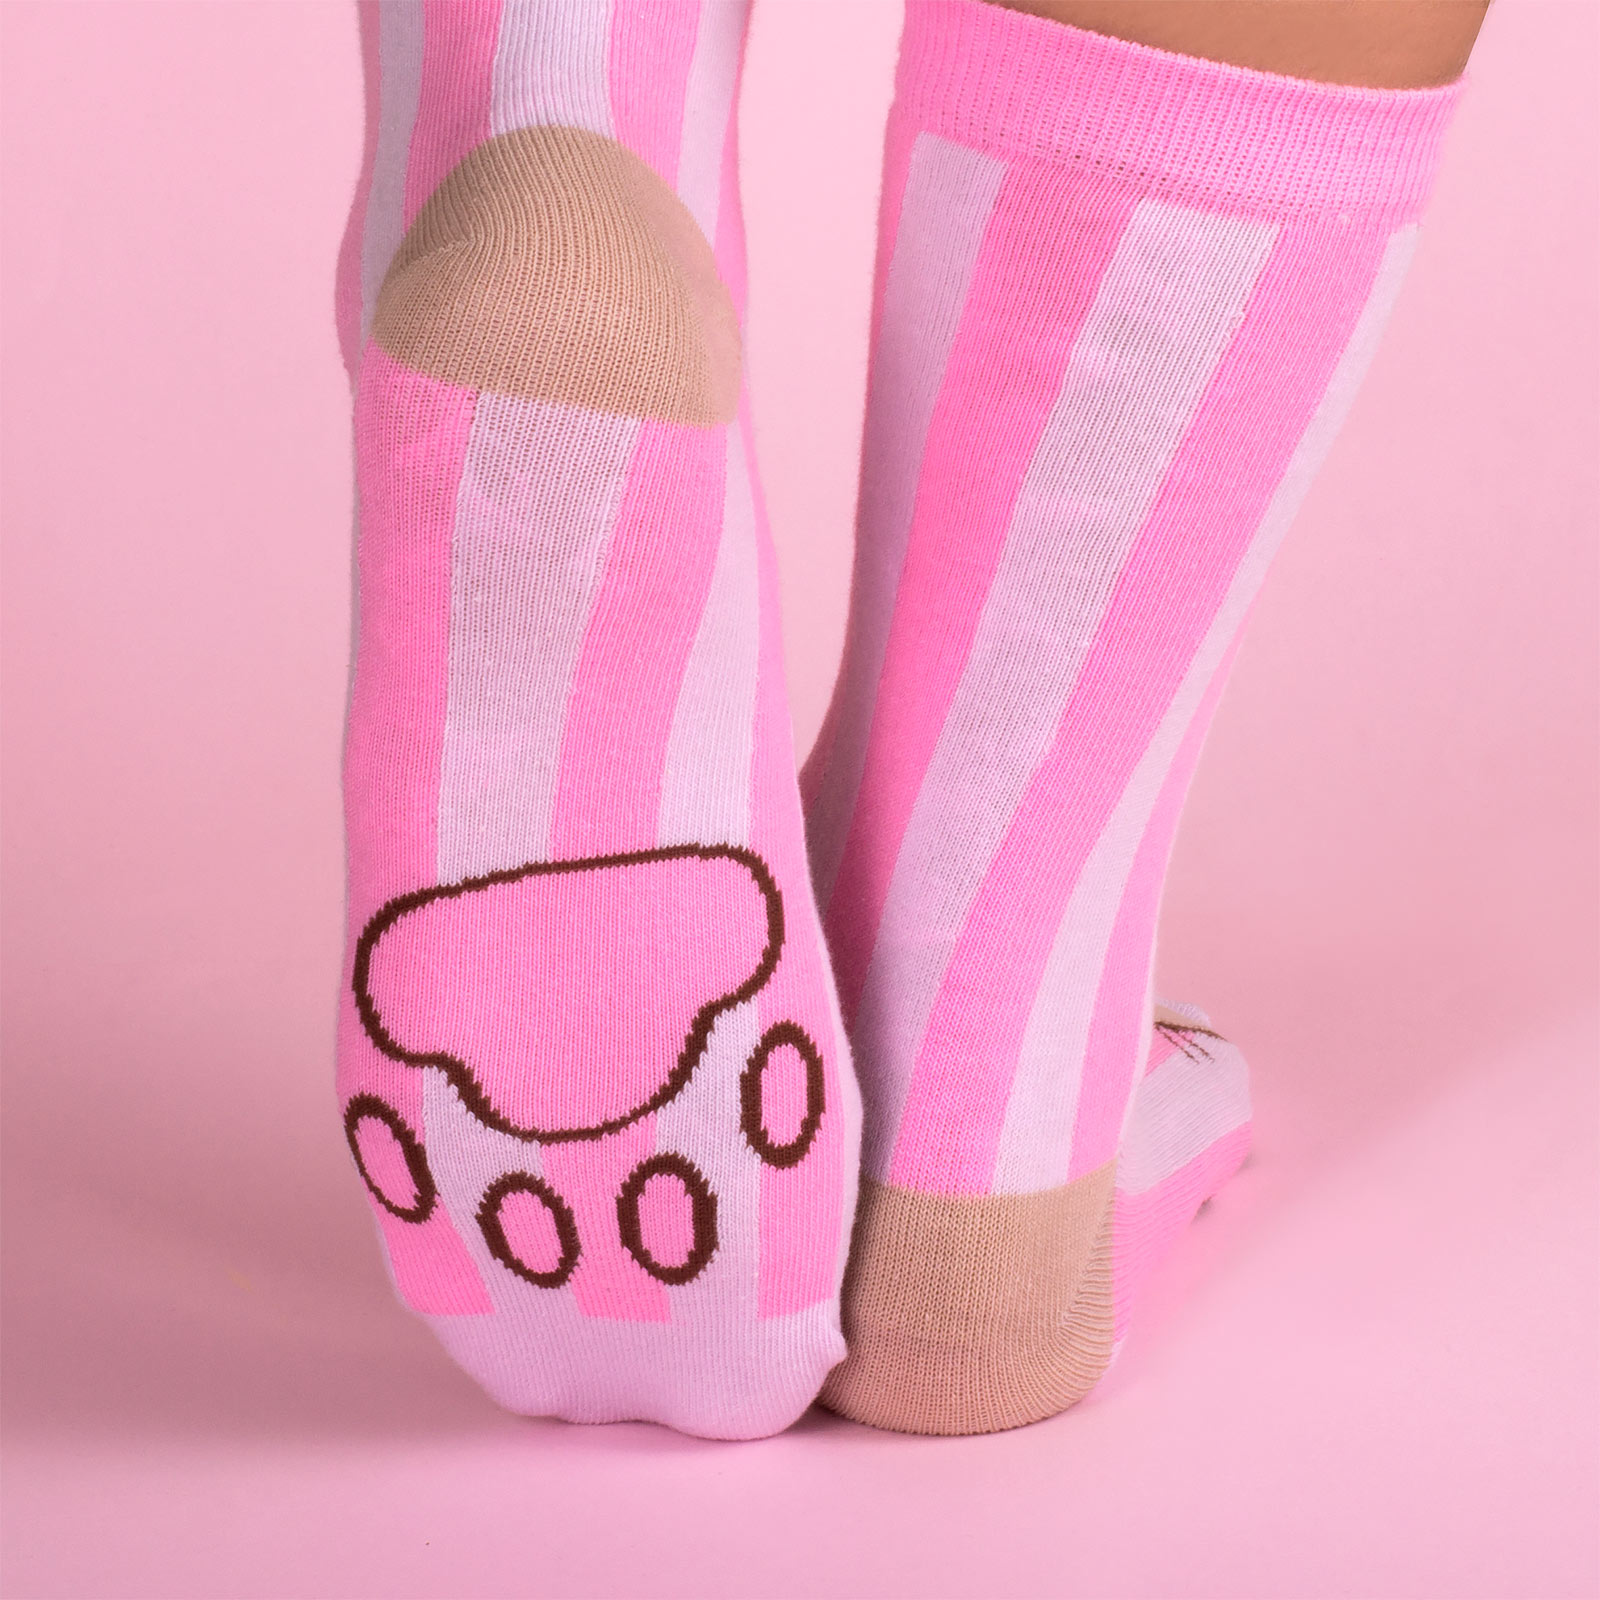 Pusheen - Marshmallow Socks and Cup